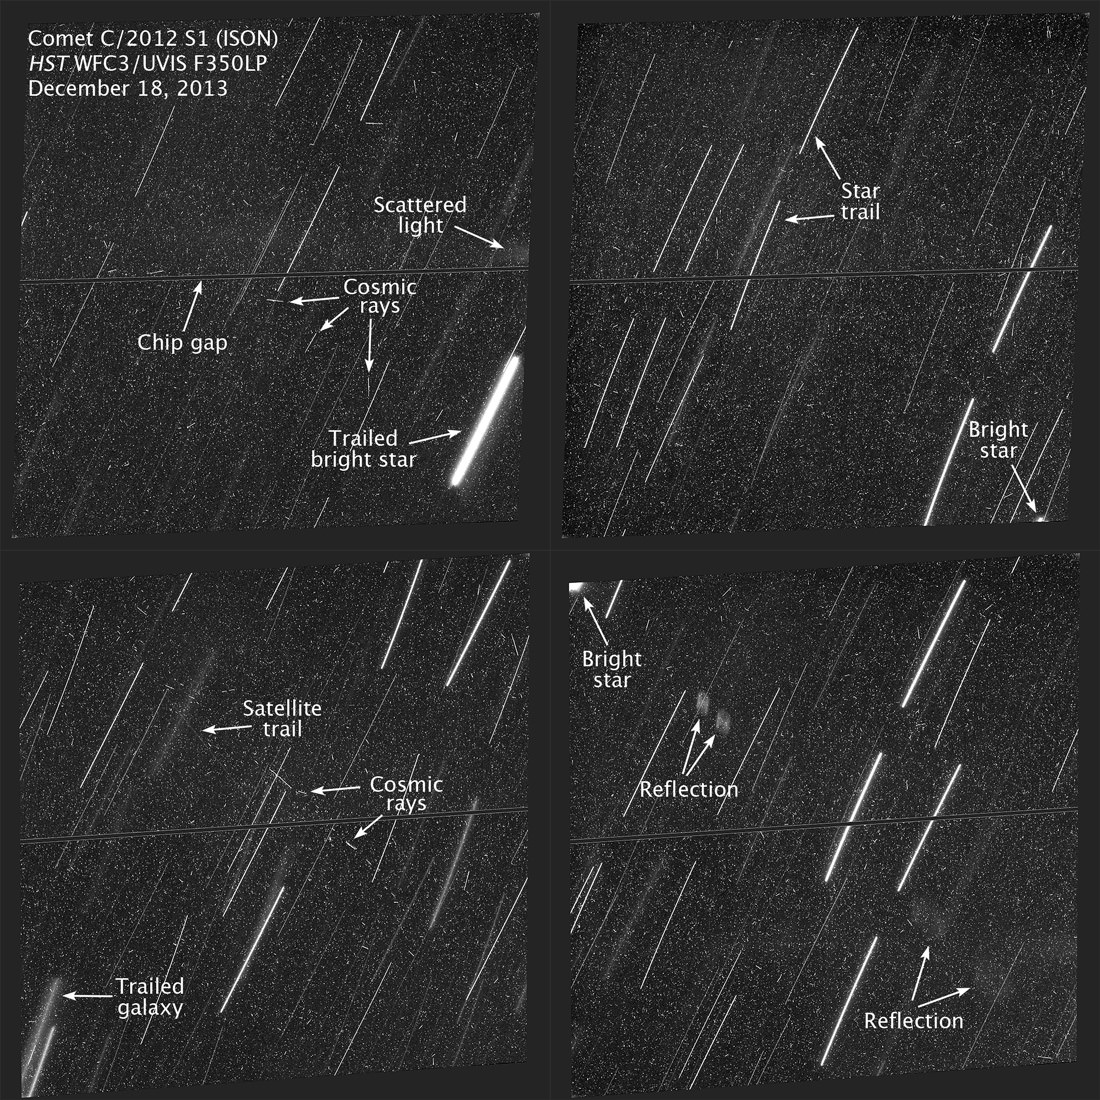 Each of the four panels is a combination of two separate exposures made by the Hubble Space Telescope as it tracked Comet ISON's position. Had the comet been in any of these frames, it would have appeared as a small fuzzy glow or stellar point(s) in the center. The stars are trailed because the camera tracked the comet. Credit: NASA/ESA